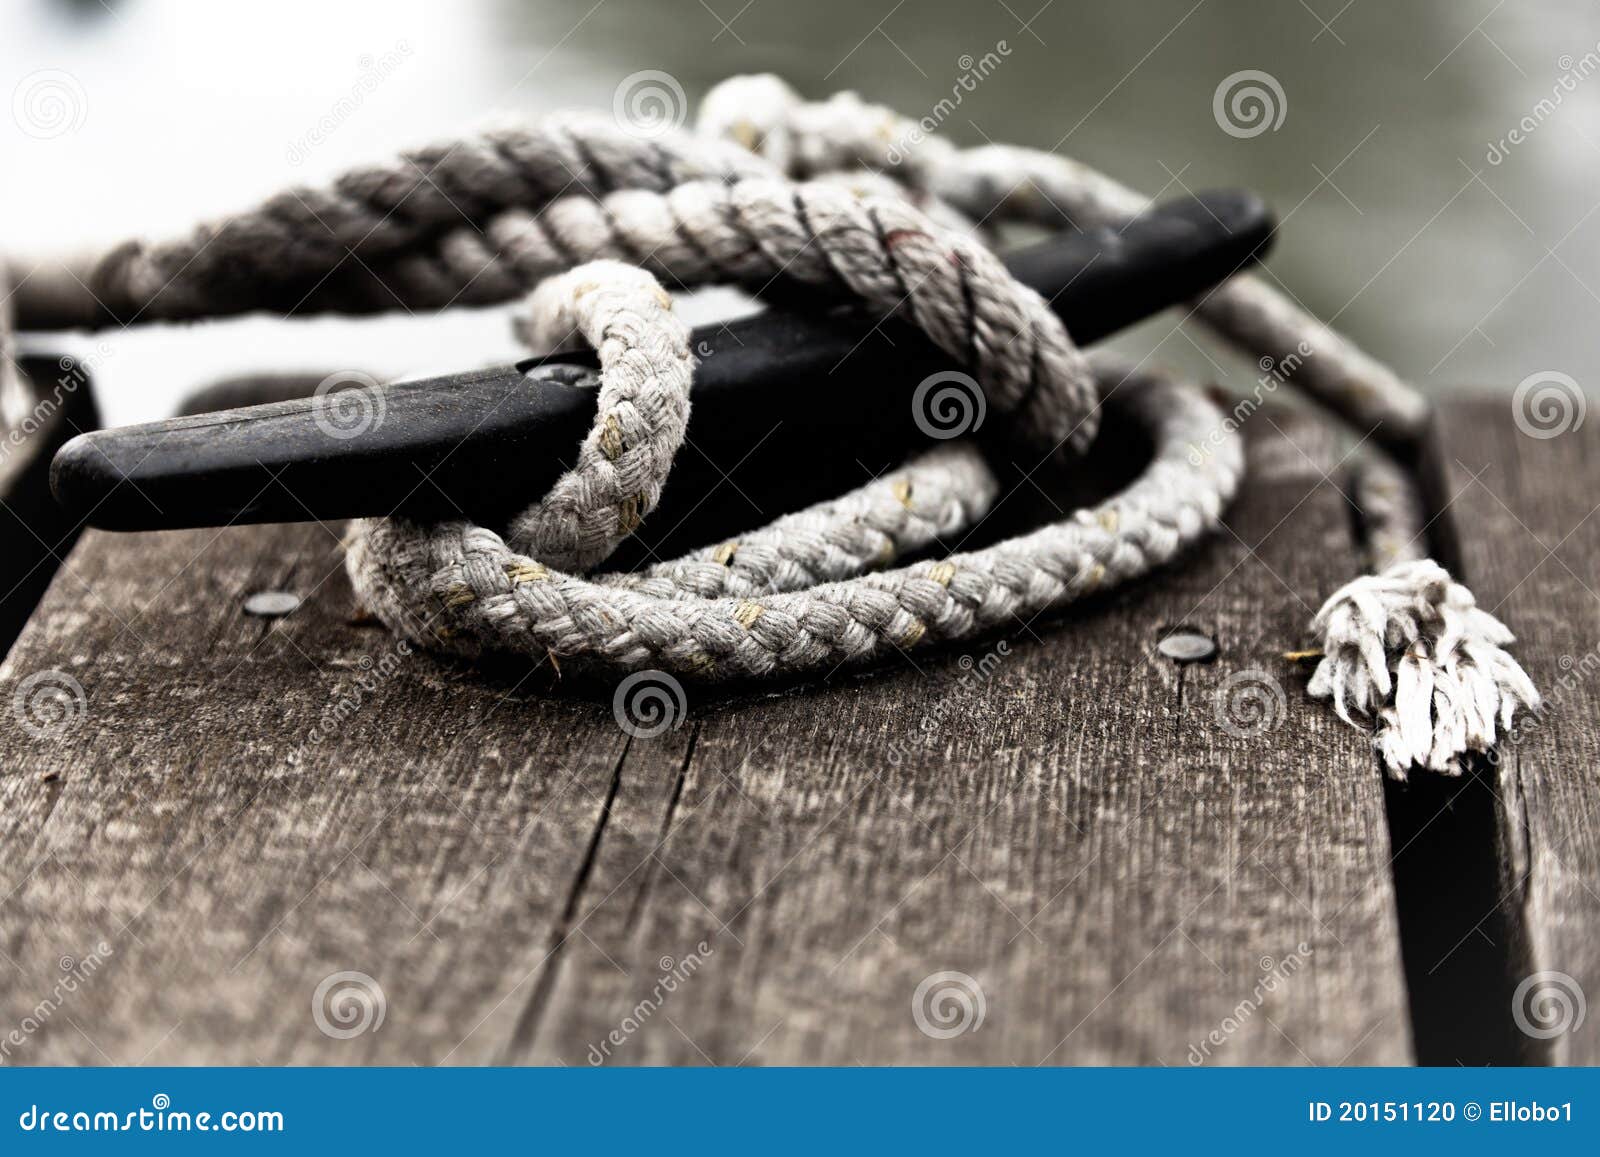 nautical rope on the cleat.